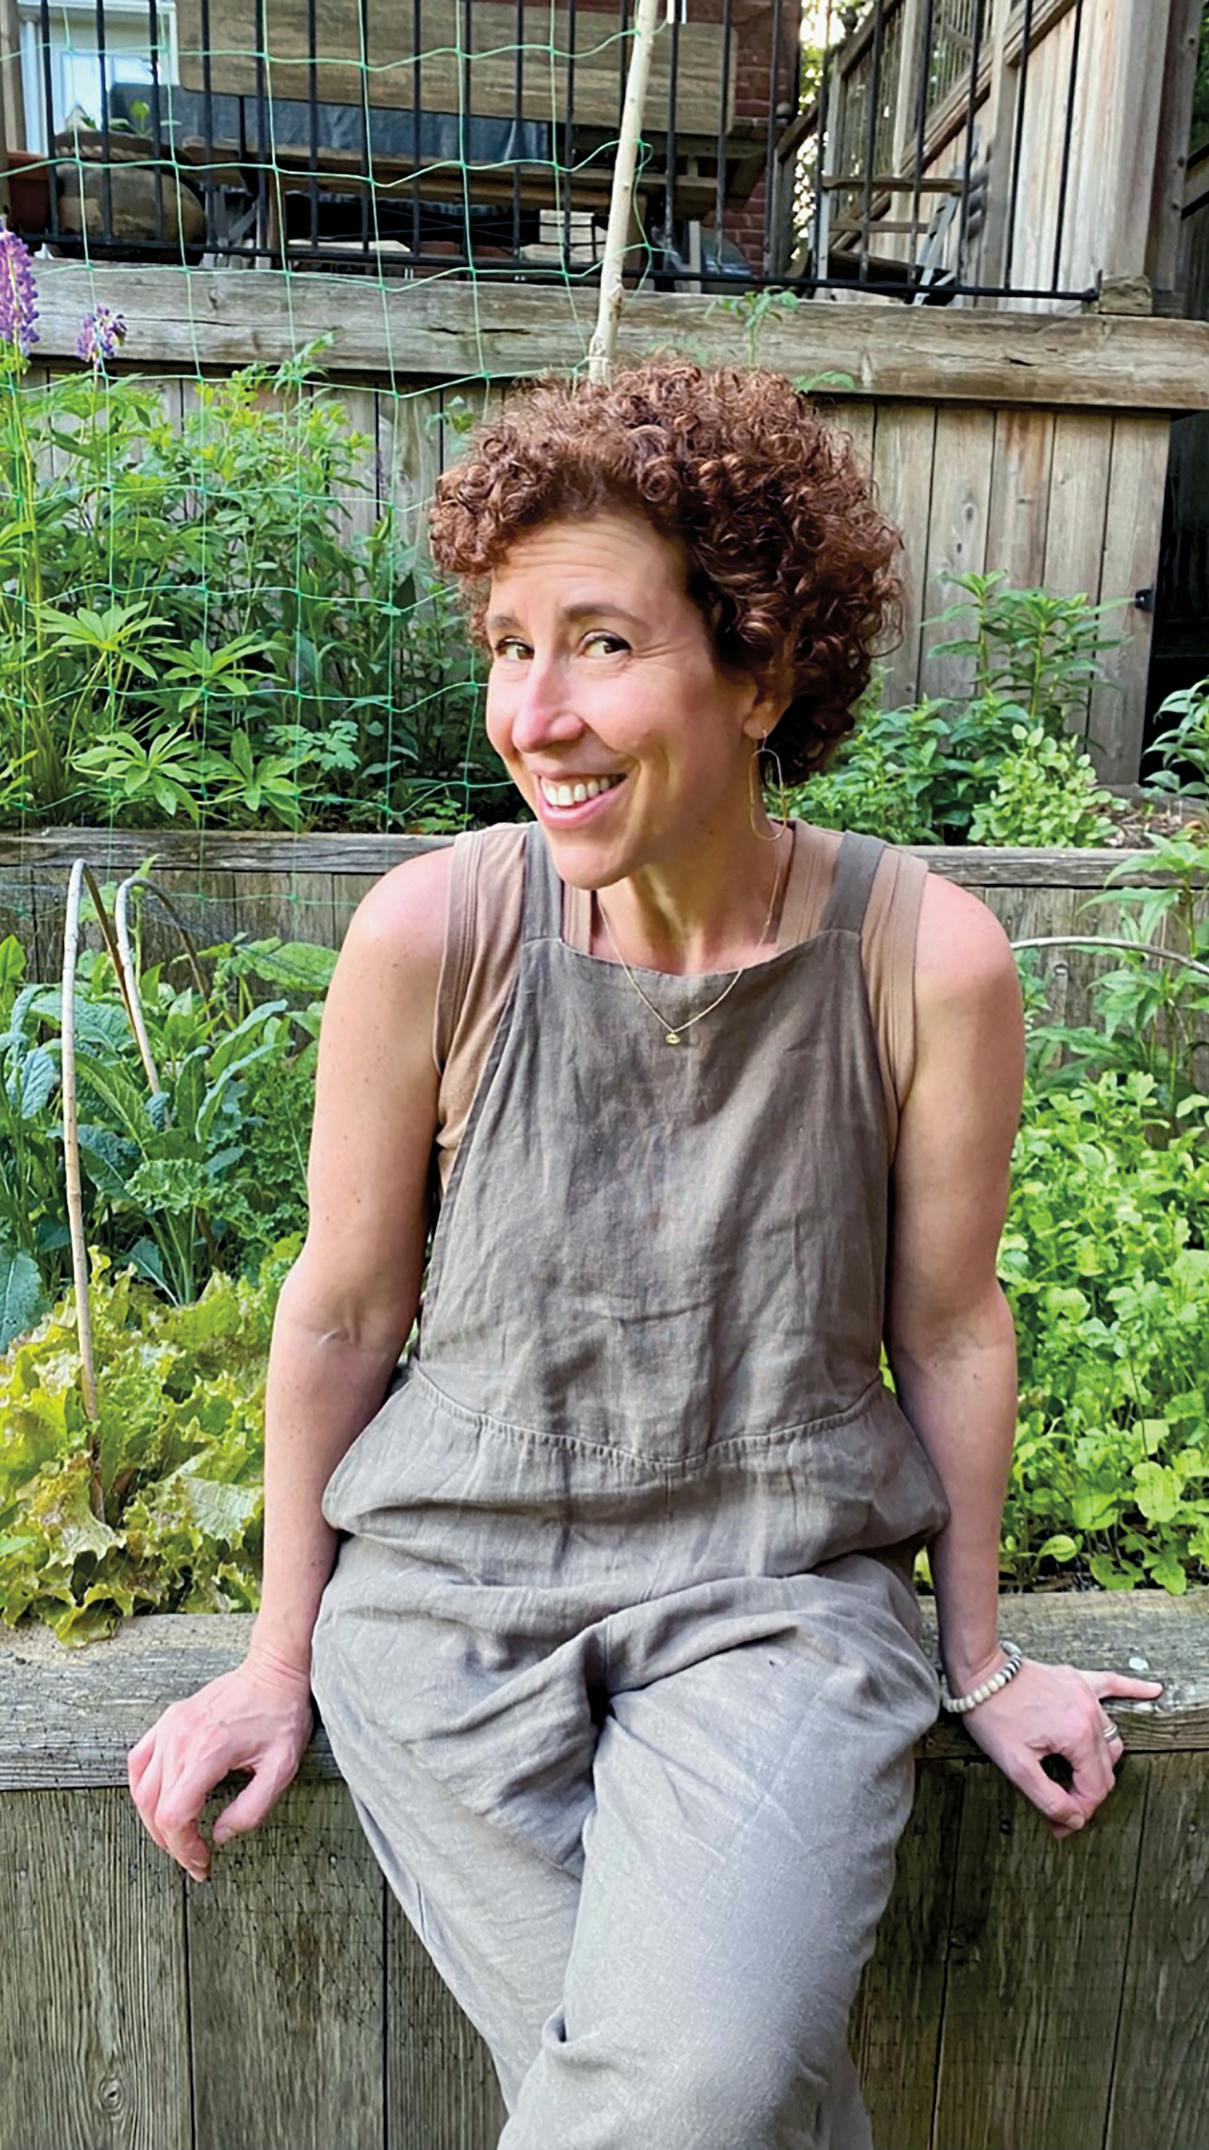 Person with curly brown hair in gray overalls sitting on wooden ledge in vegetable garden